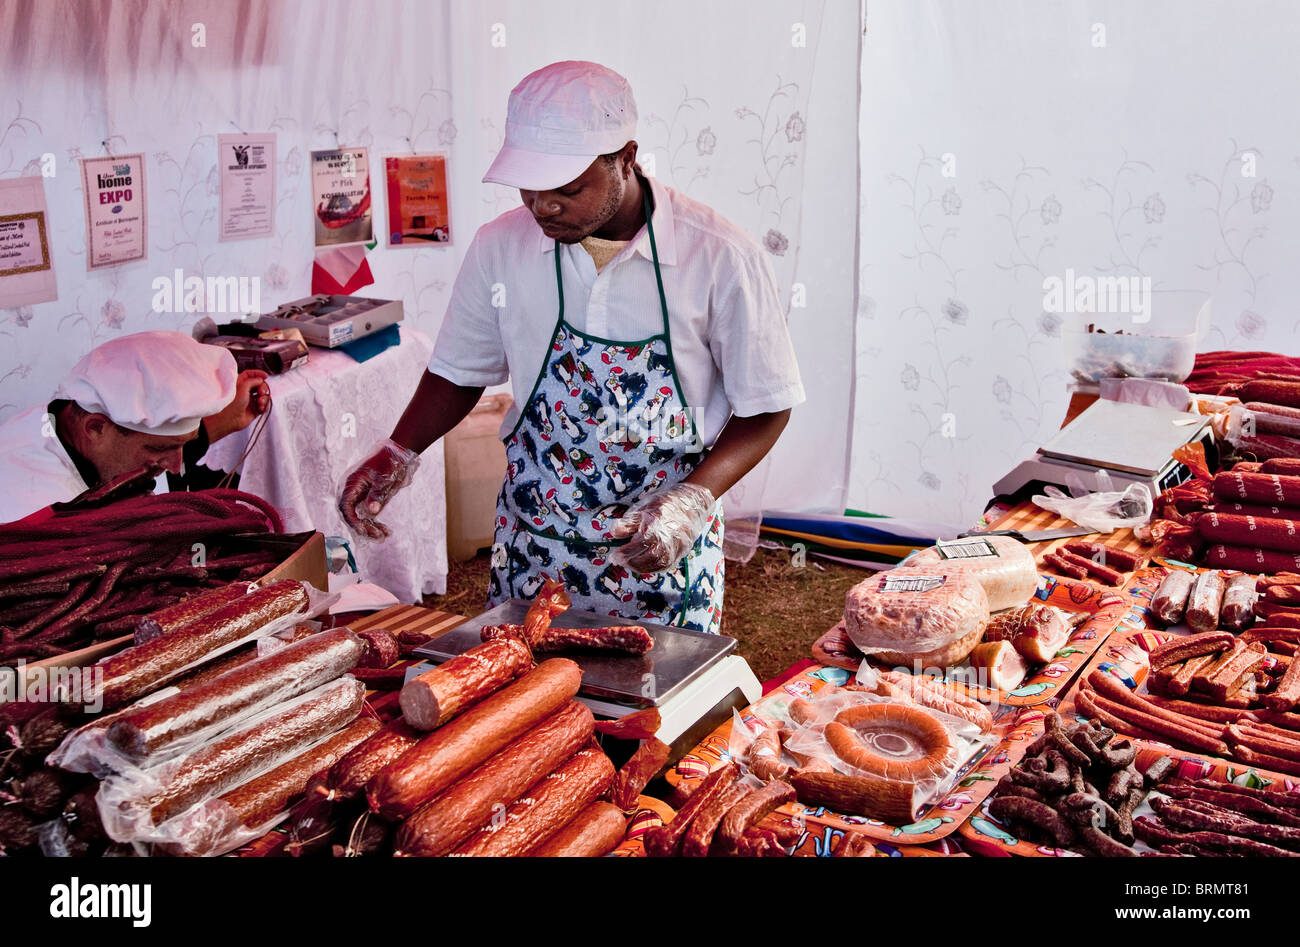 Man weighing salami at a market stall selling cured meat Stock Photo